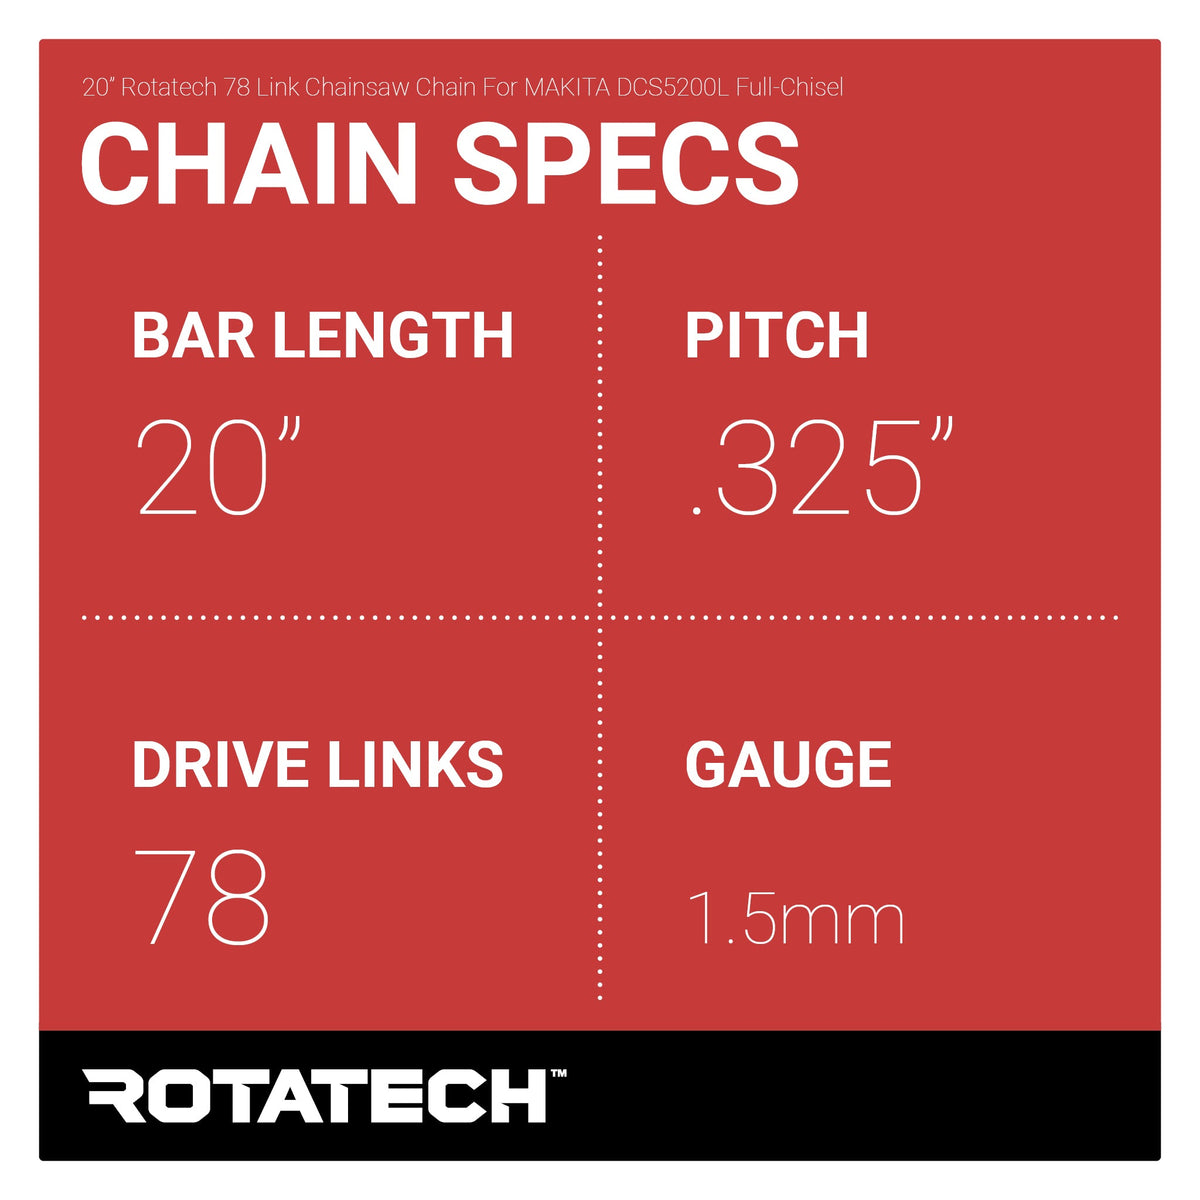 20" Rotatech 78 Link Chainsaw Chain For MAKITA DCS5200L Full-Chisel Chain Specs